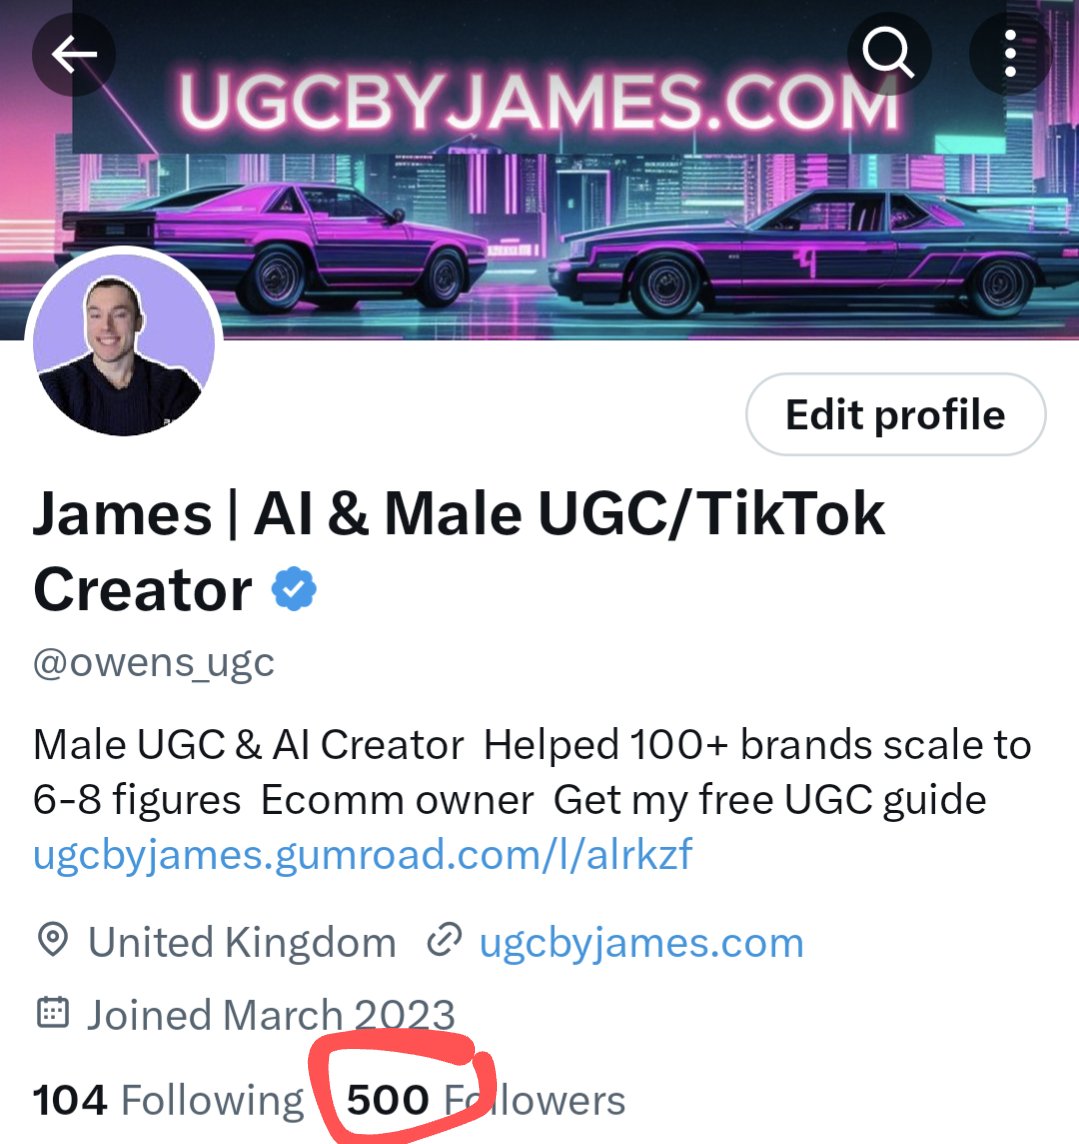 Woke up to 500 friends (Cue the unfollow which drops this to 499 when this is posted haha) If you have less than 1000 followers... Or if we've never properly connected... Drop a hello and introduce yourself below 🤝 Let's grow together